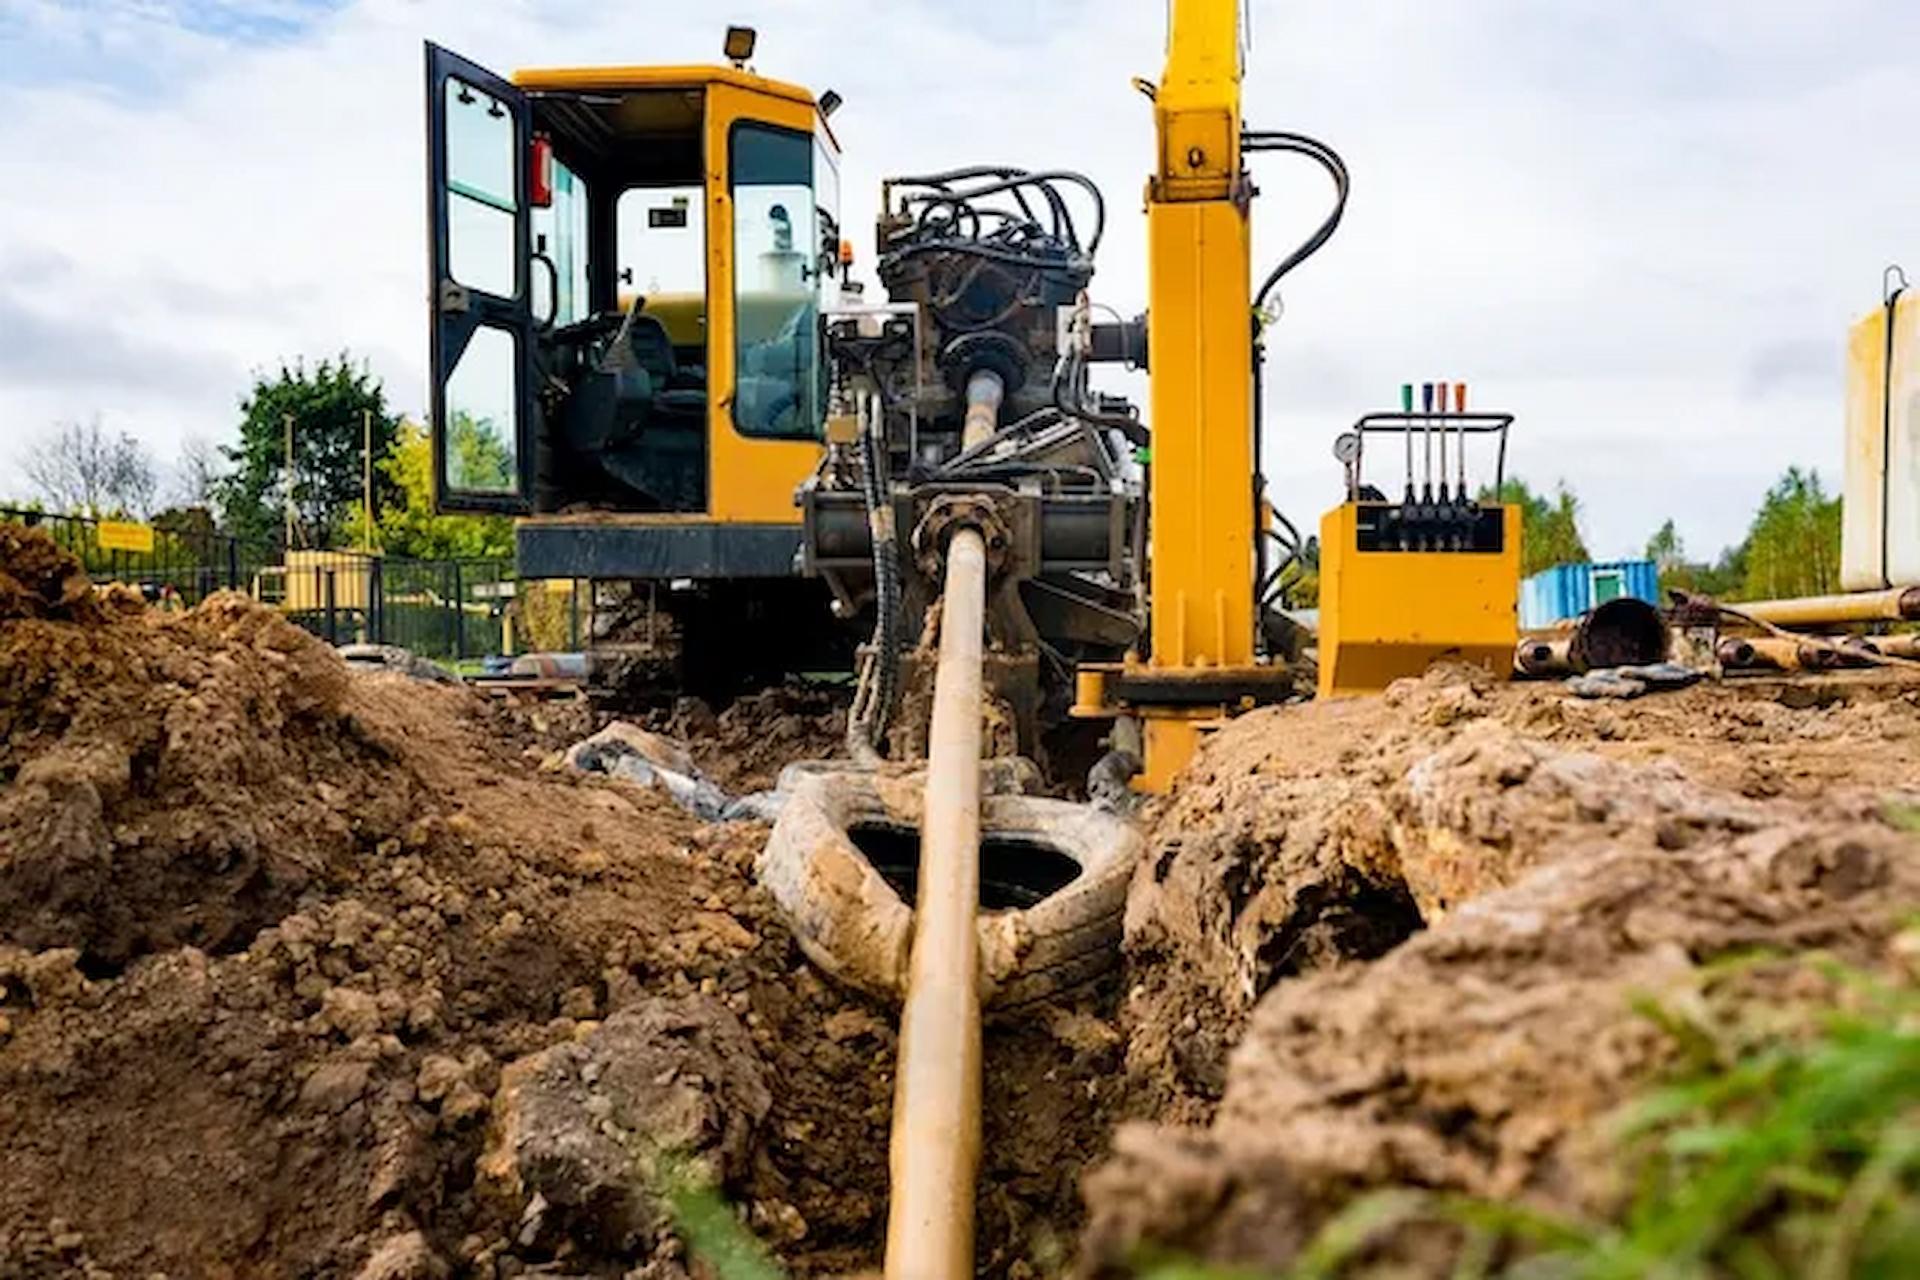 What Is Moling: A Method Of Installing Underground Pipes, Cables, And Conduits Without The Need For Excavation